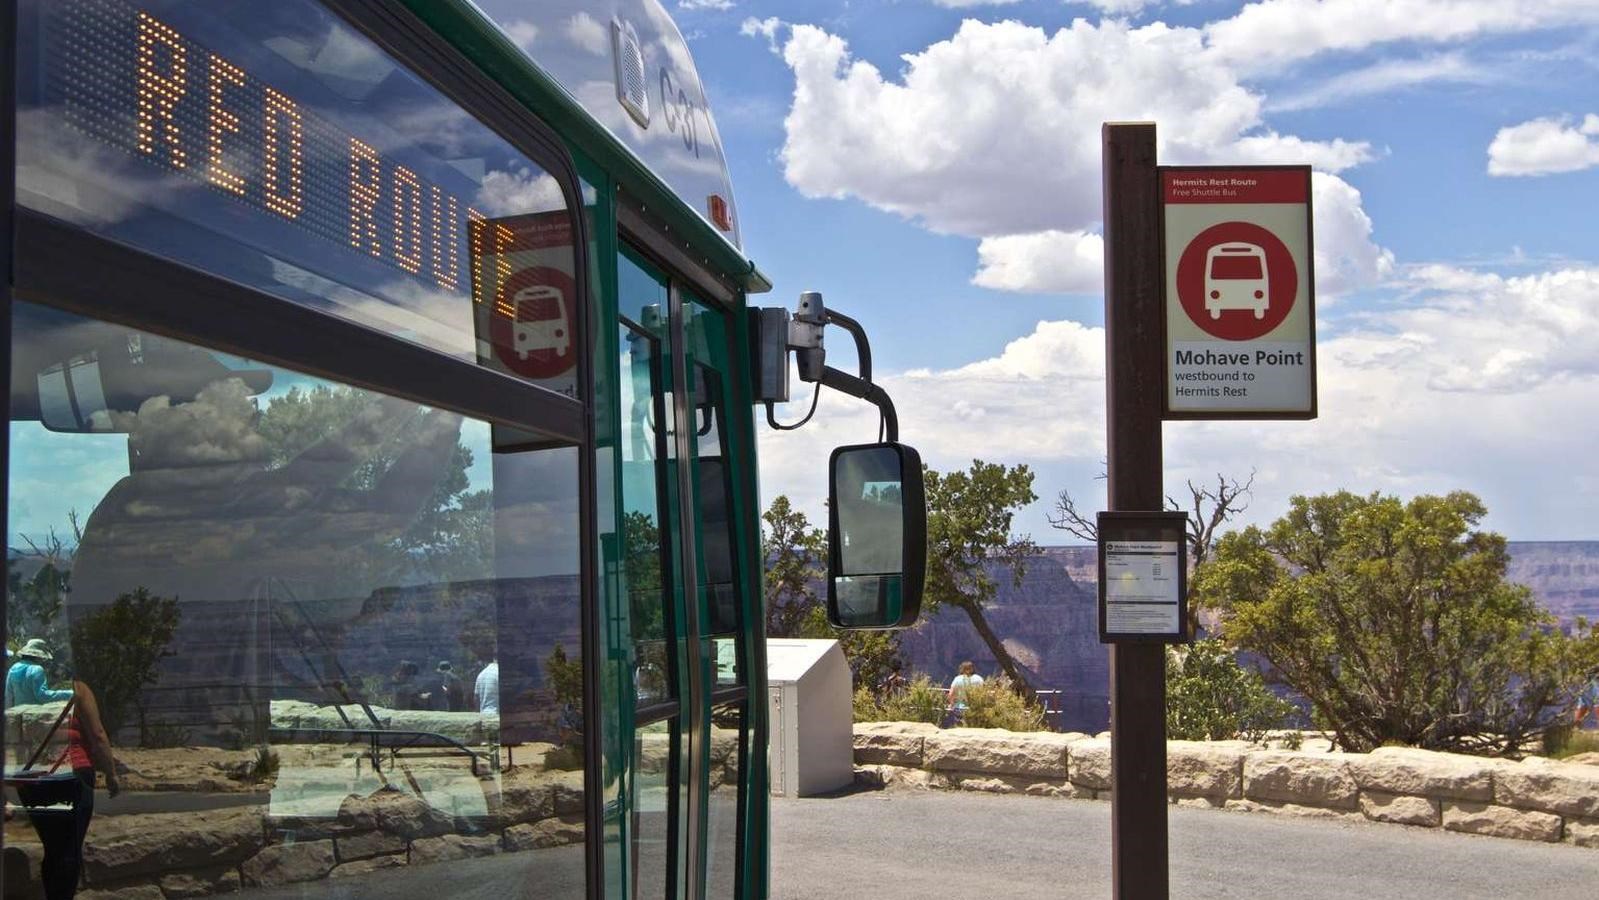 A close up image of the front of shuttle bus next to a sign